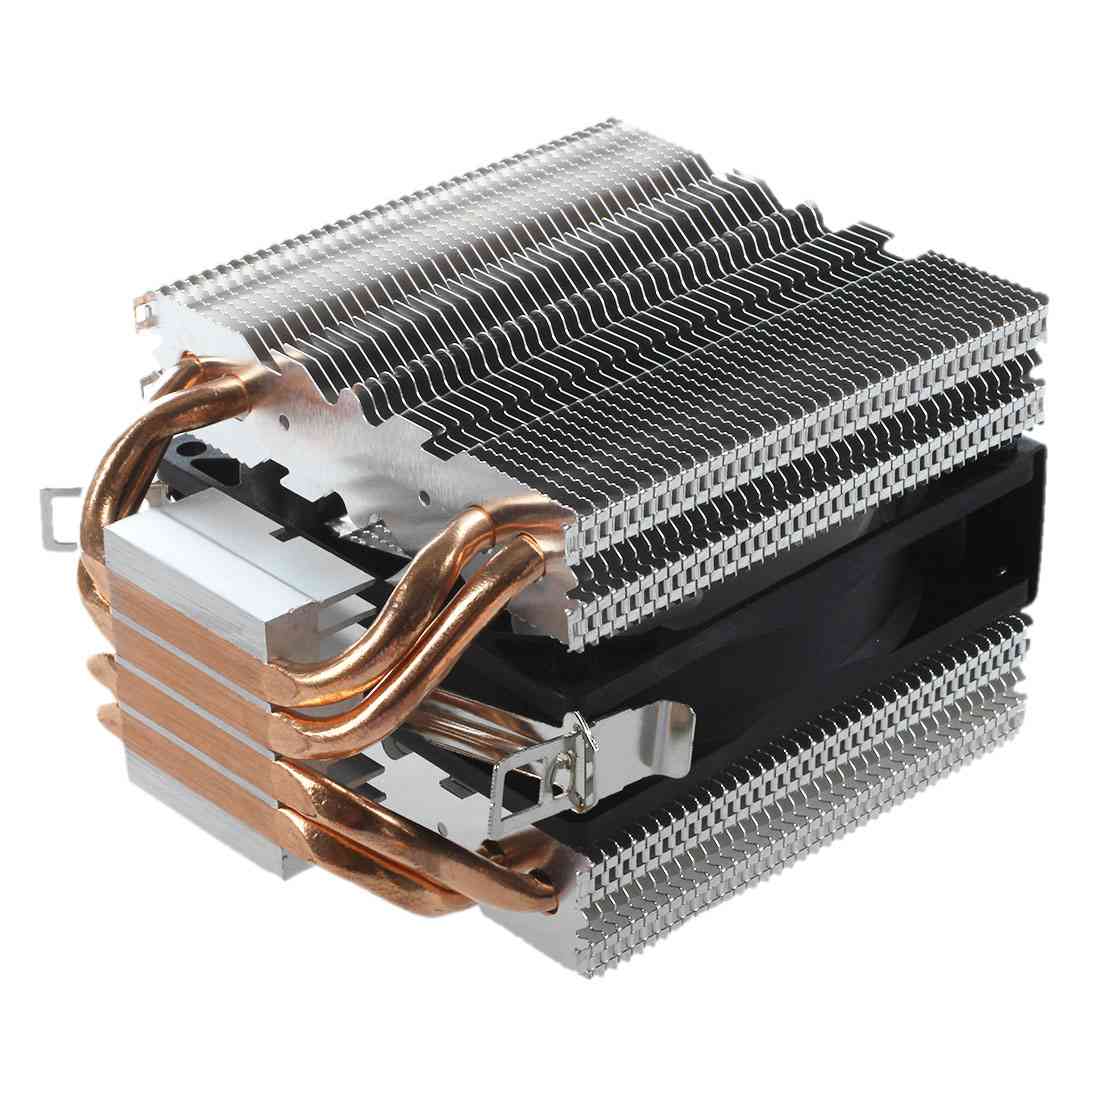 New CPU Water Cooling Block Waterblock 50mm Copper Base Cool Inner Channel High quality Computer water Cooling Cooler For CPU